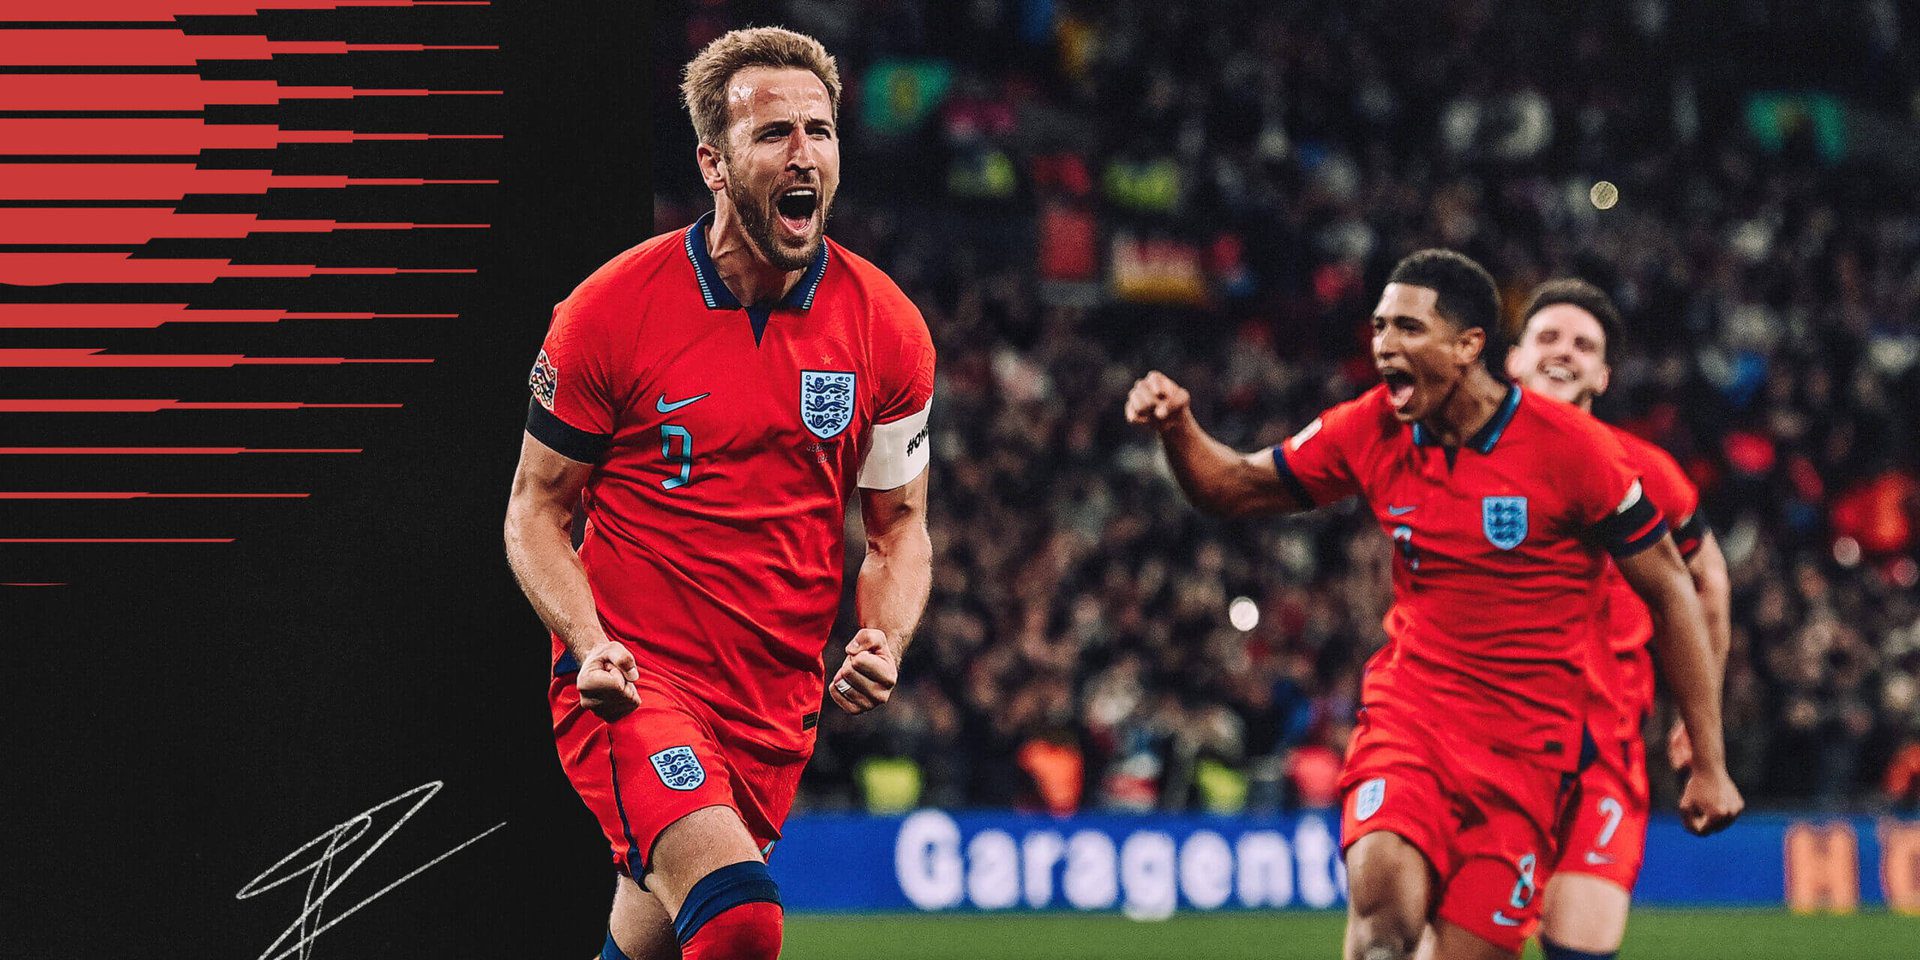 England World Cup 2022 Team Guide: Southgate will stick to the trusted experience - good or bad